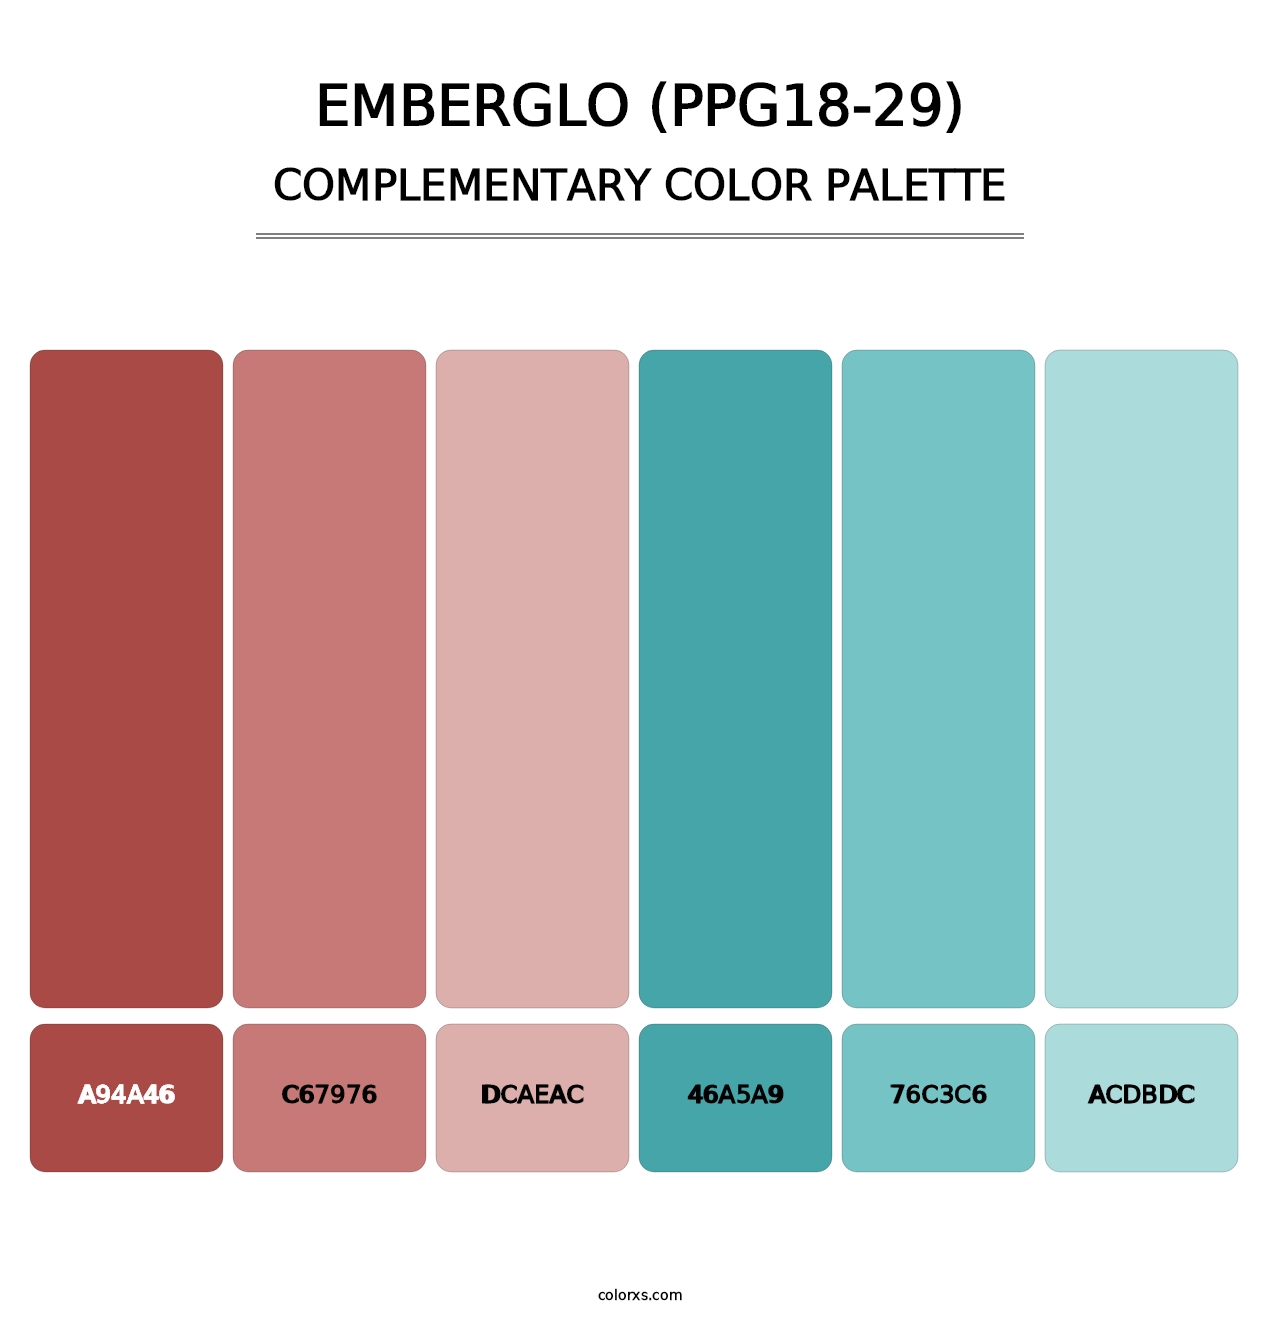 Emberglo (PPG18-29) - Complementary Color Palette